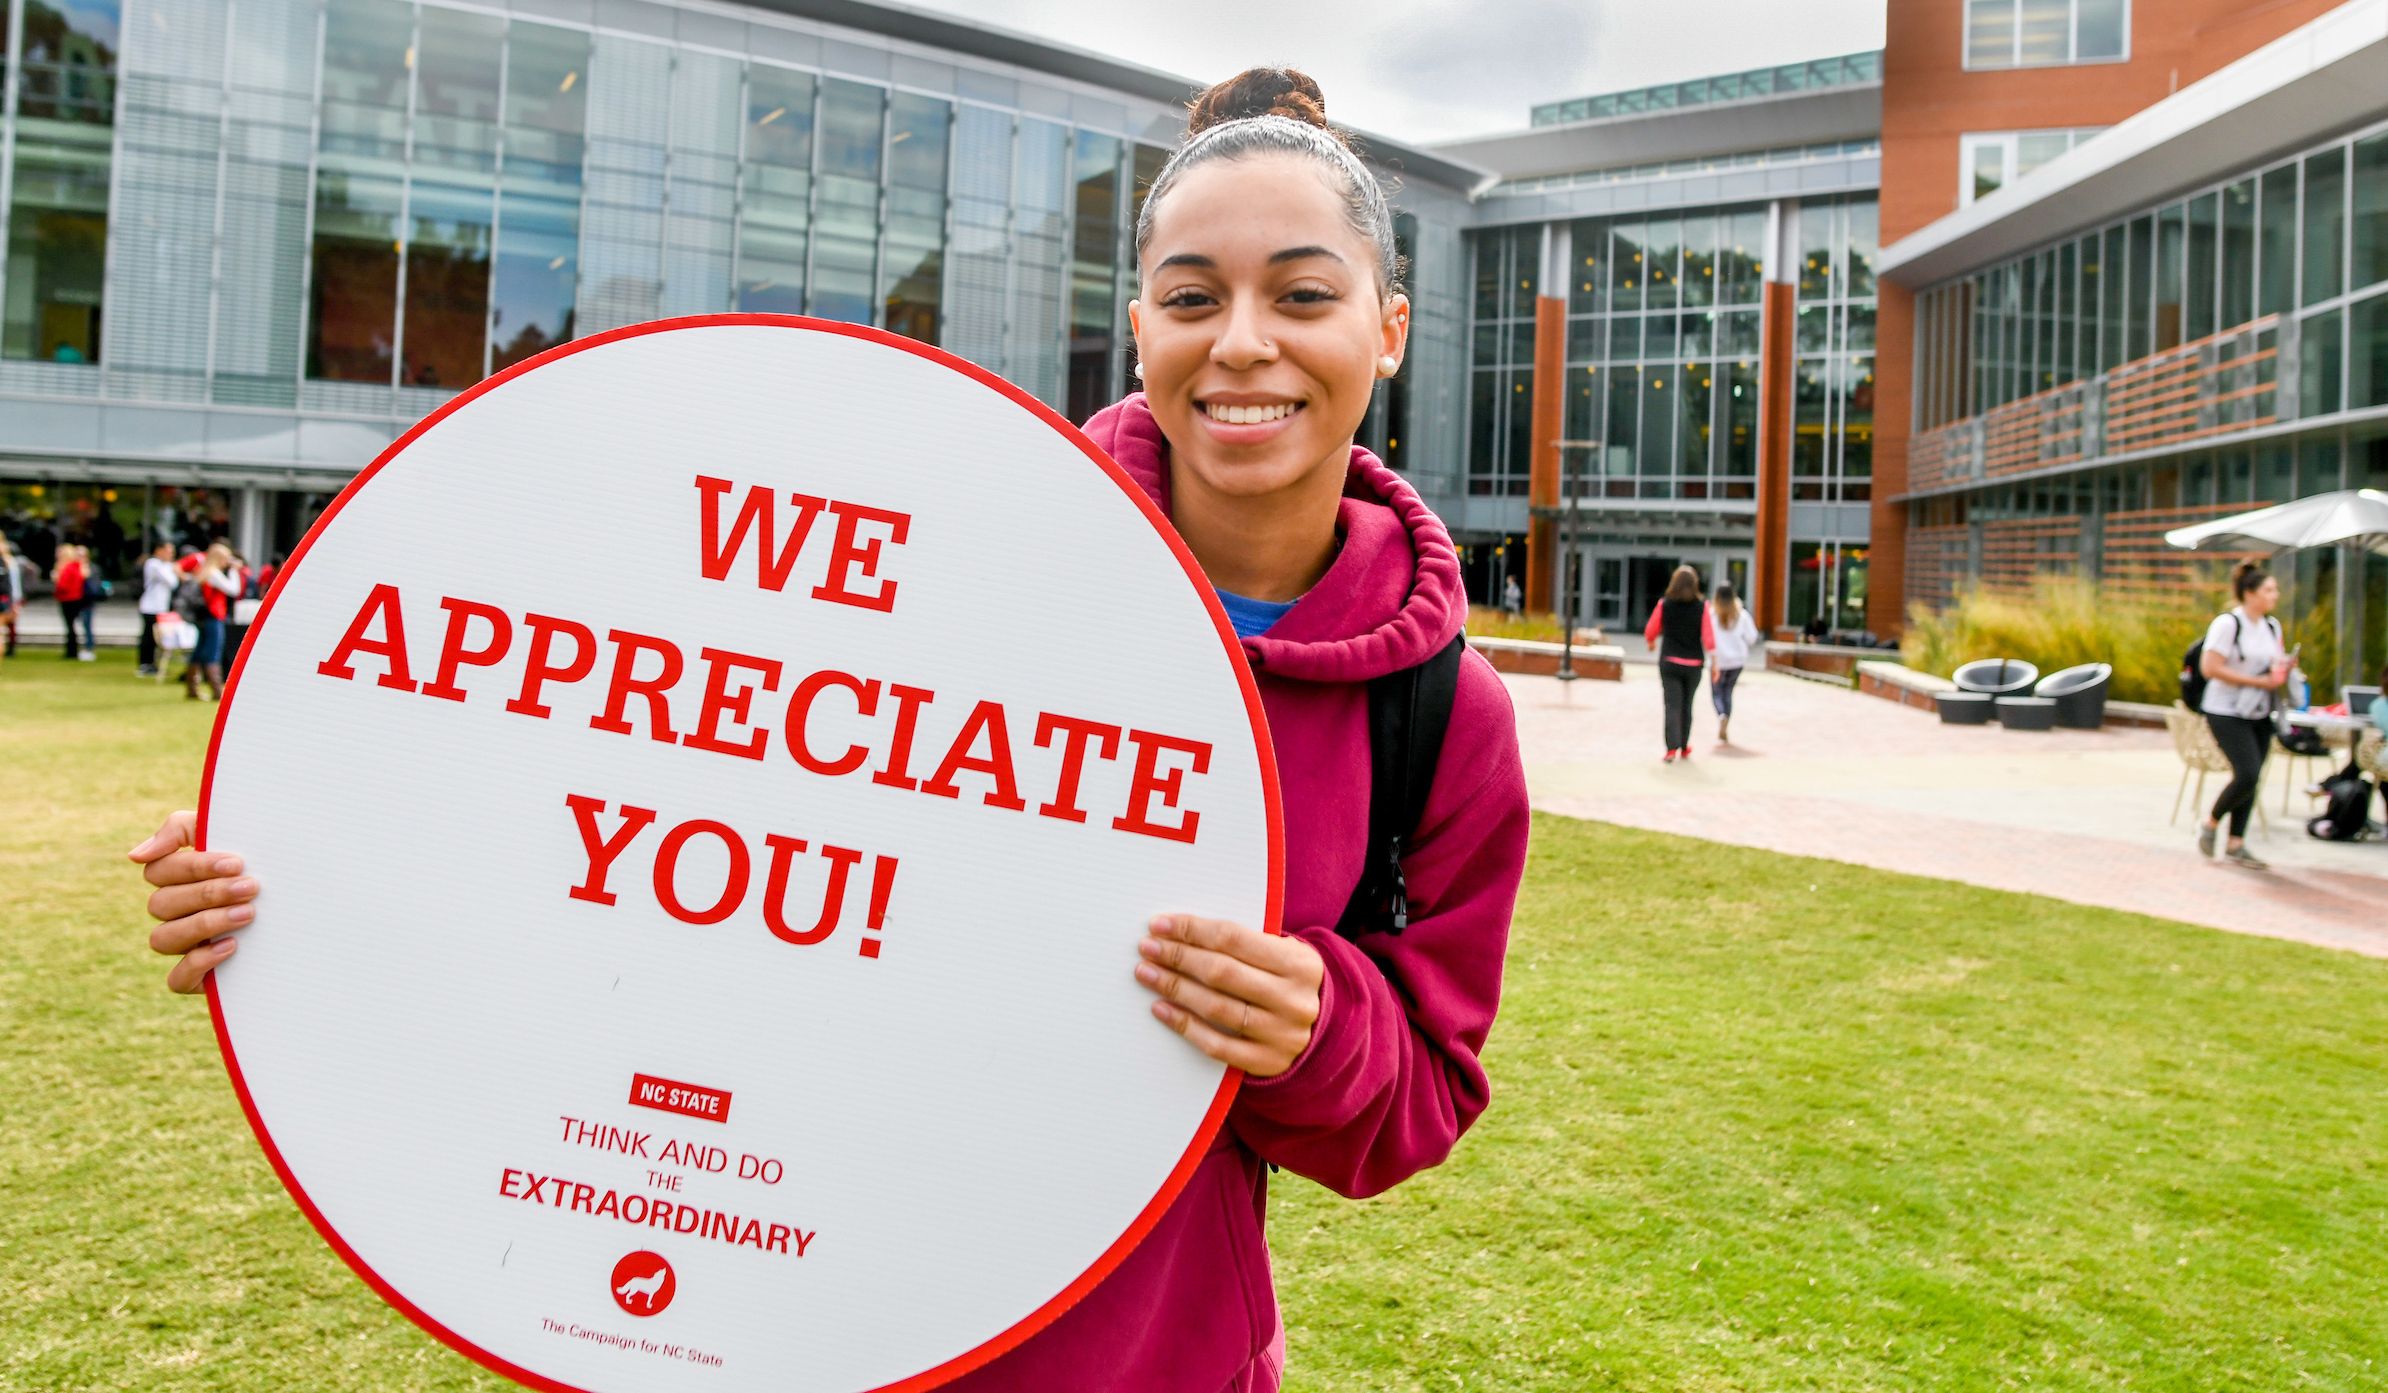 College student holds sign saying "We appreciate you"